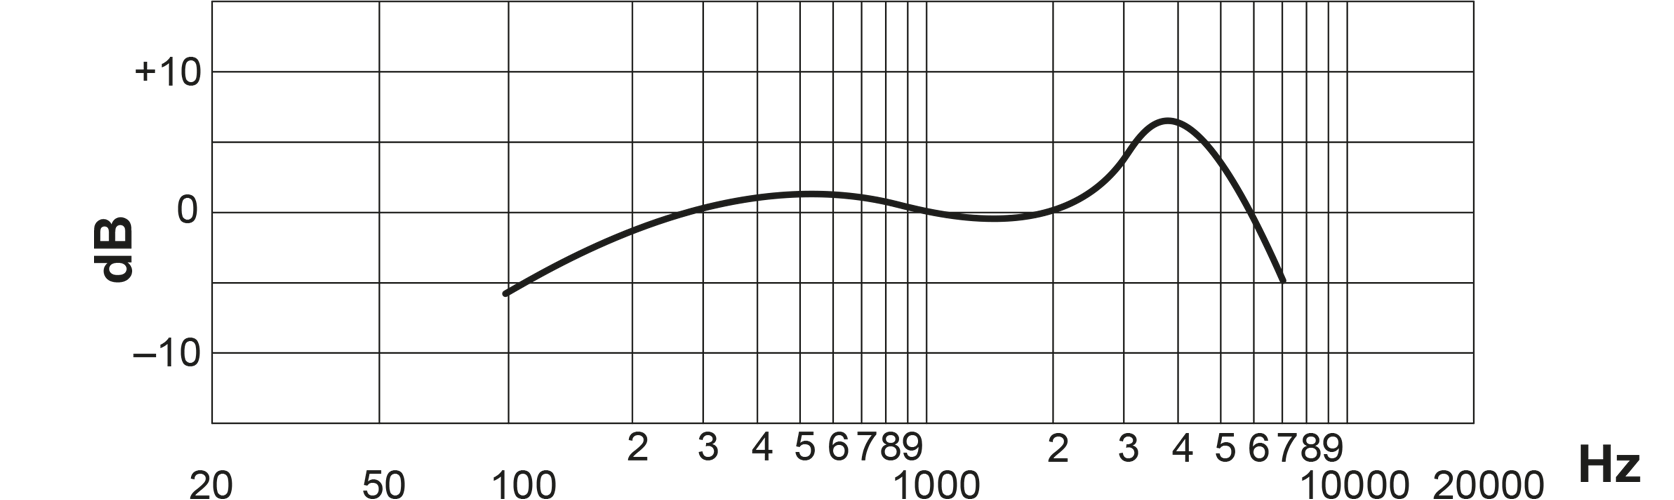 Frequency Response Curve Image: